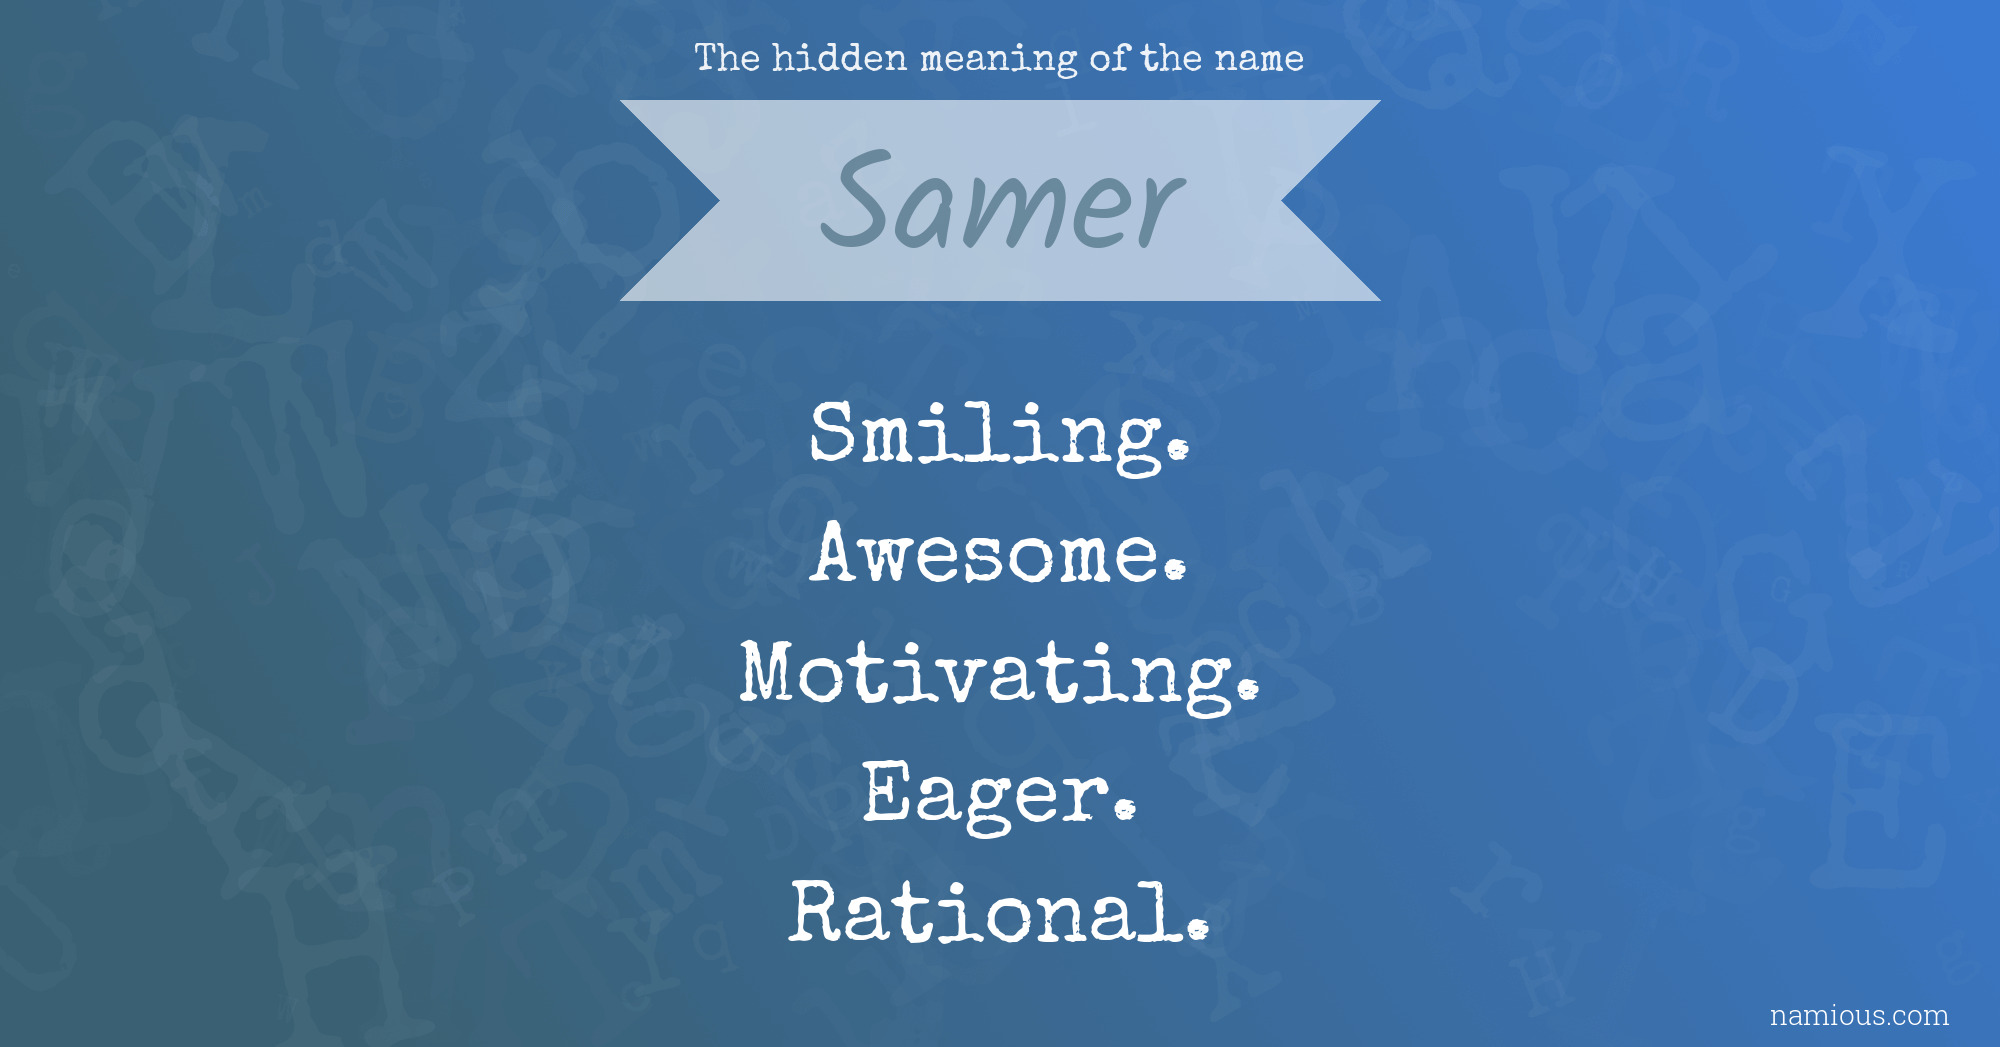 The hidden meaning of the name Samer